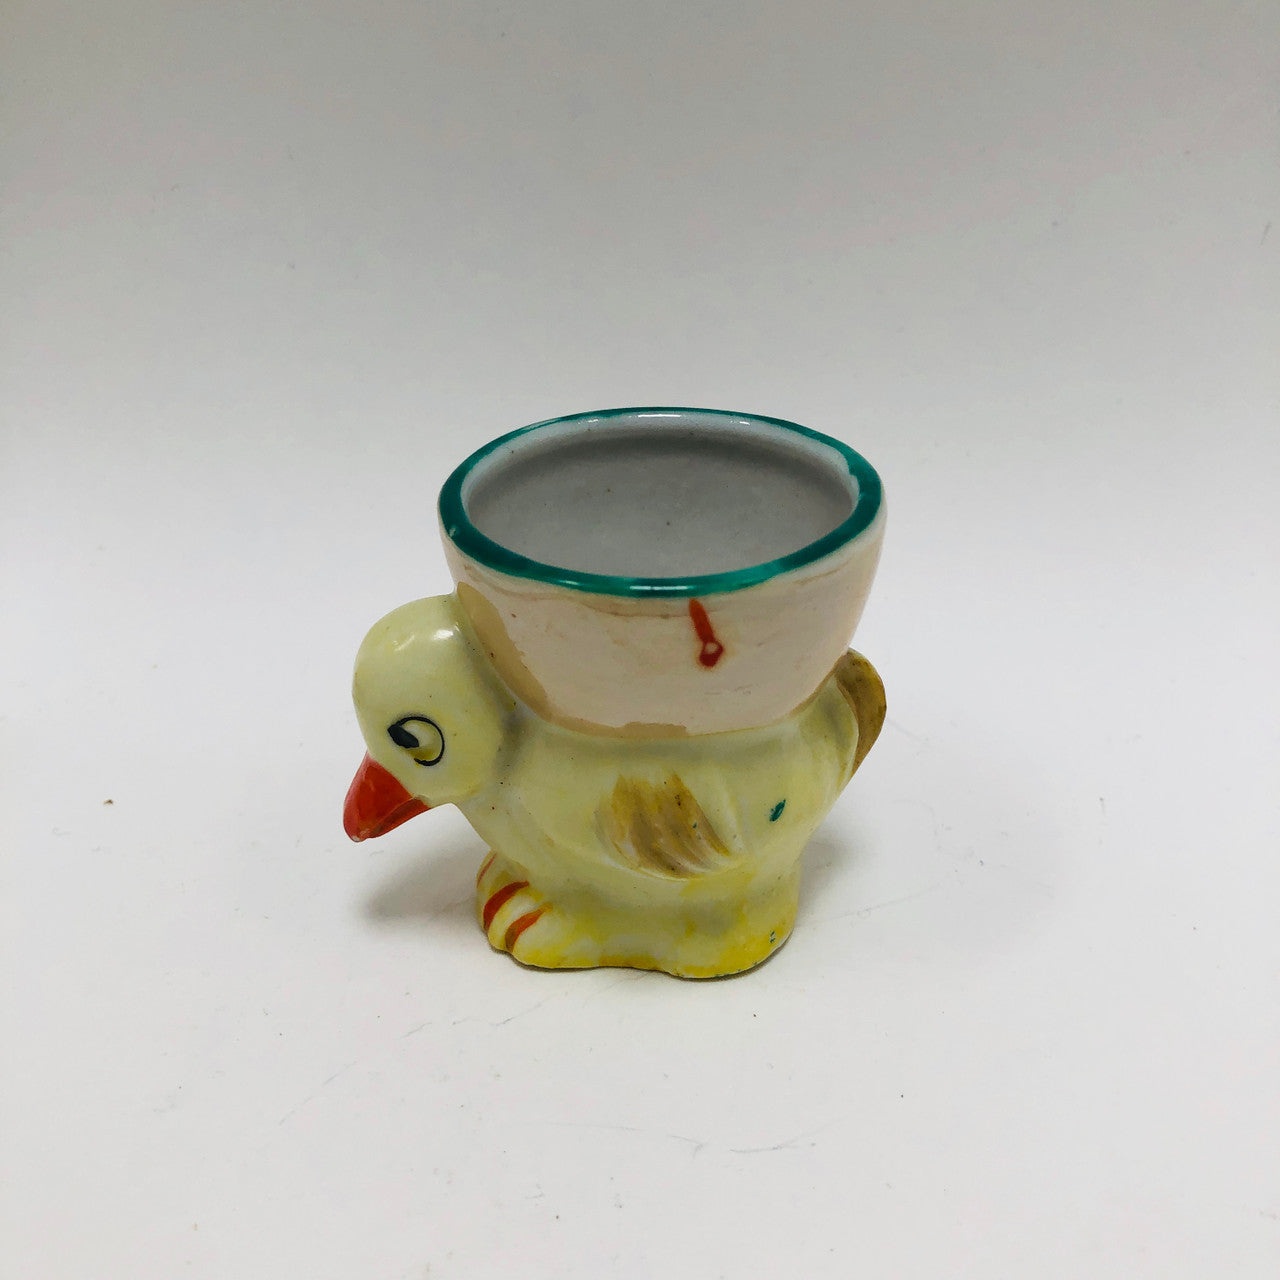 Ceramic, Vintage, Retro, Duckling, Figural, ~1950s, Egg Cup, Japan, Yellow